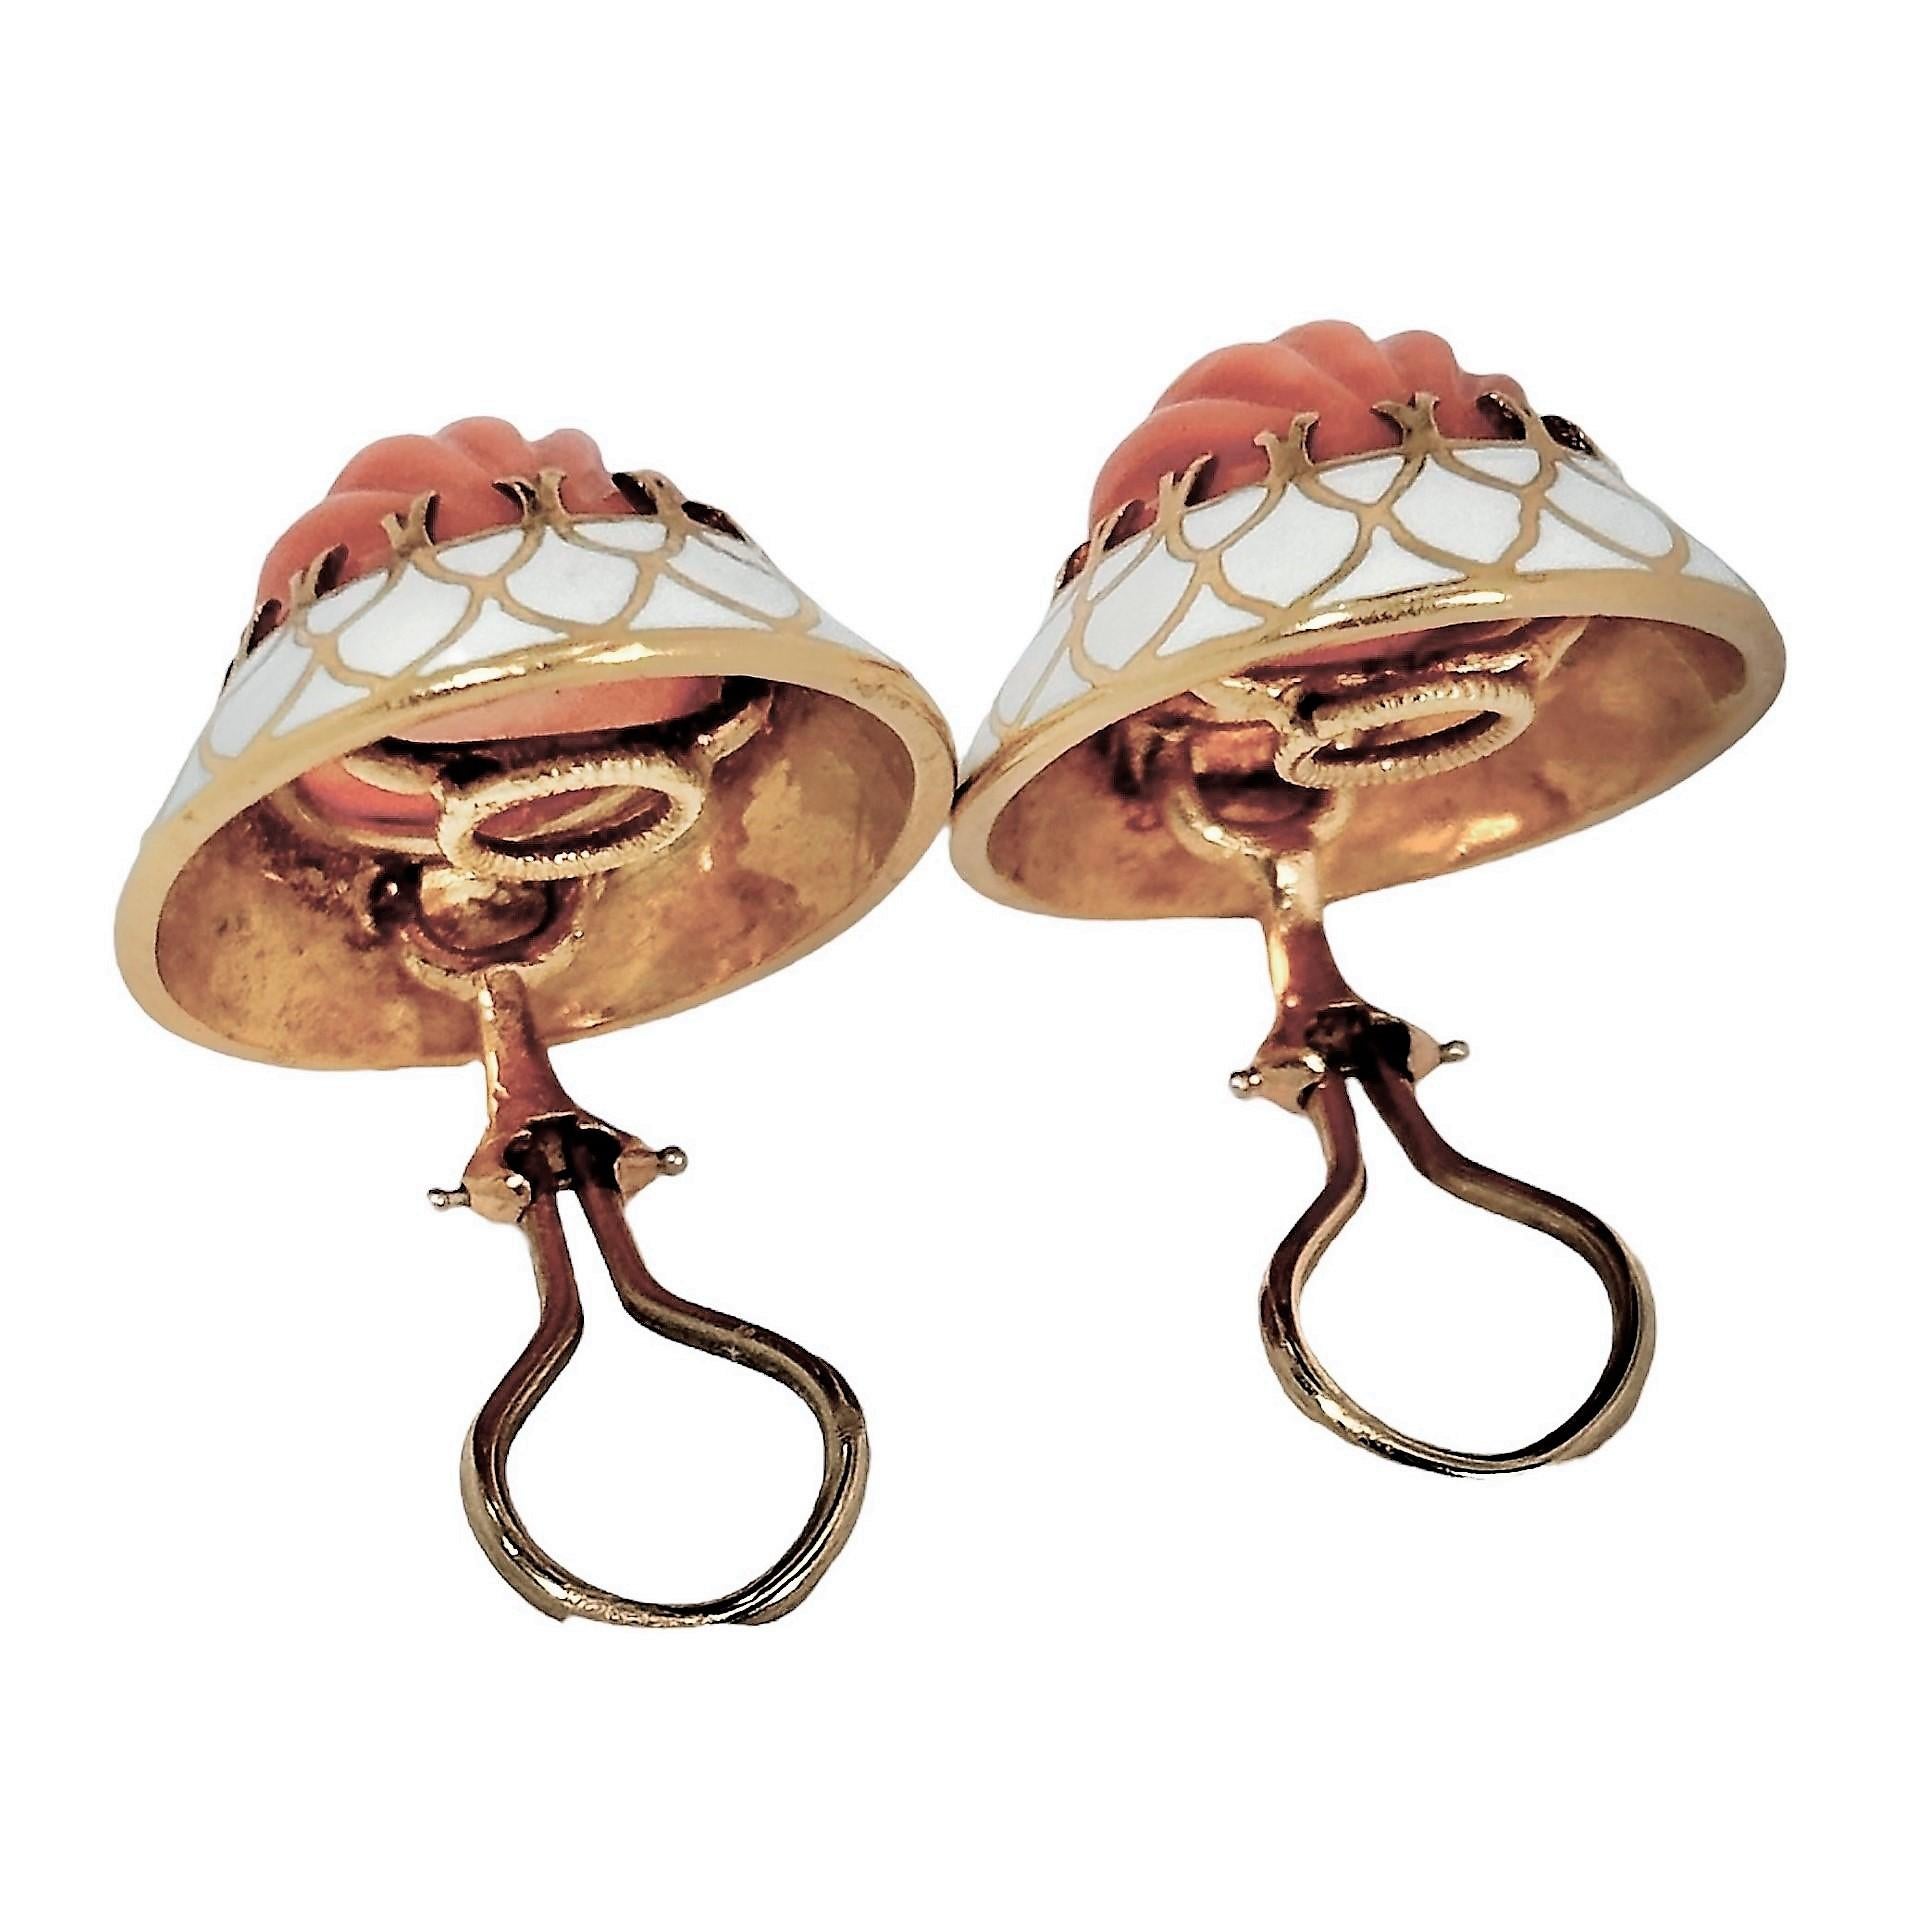 Cabochon 18k Yellow Gold, Salmon Color Coral and White Enamel Earrings - Great for Summer For Sale